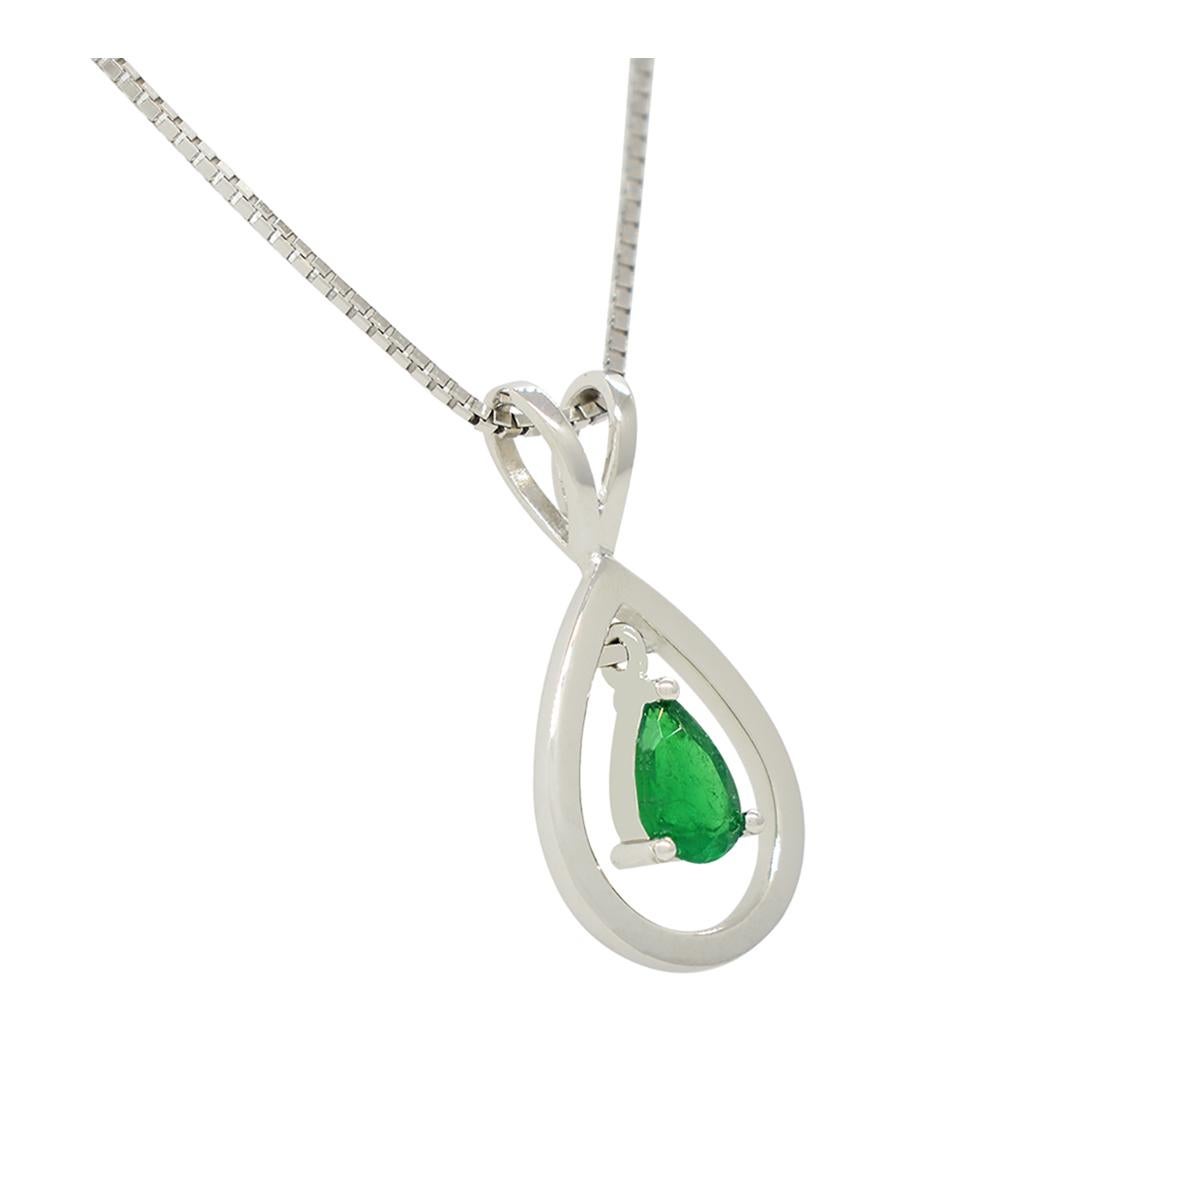 Contemporary Teardrop Emerald Pendant Necklace with Small Pear Shape Emerald in White Gold For Sale